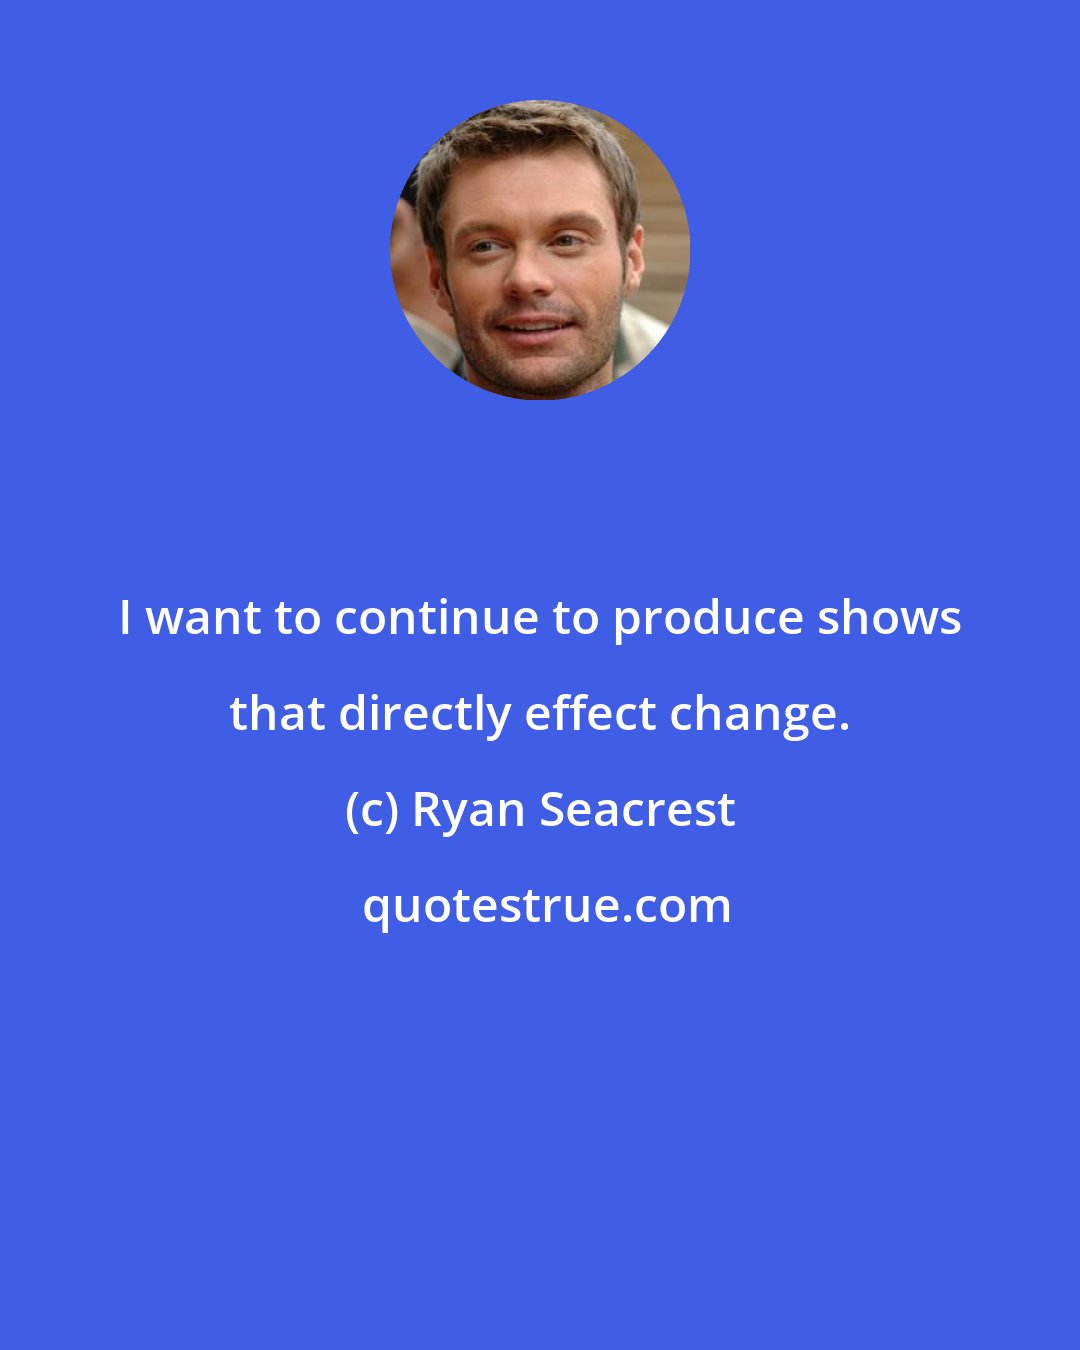 Ryan Seacrest: I want to continue to produce shows that directly effect change.